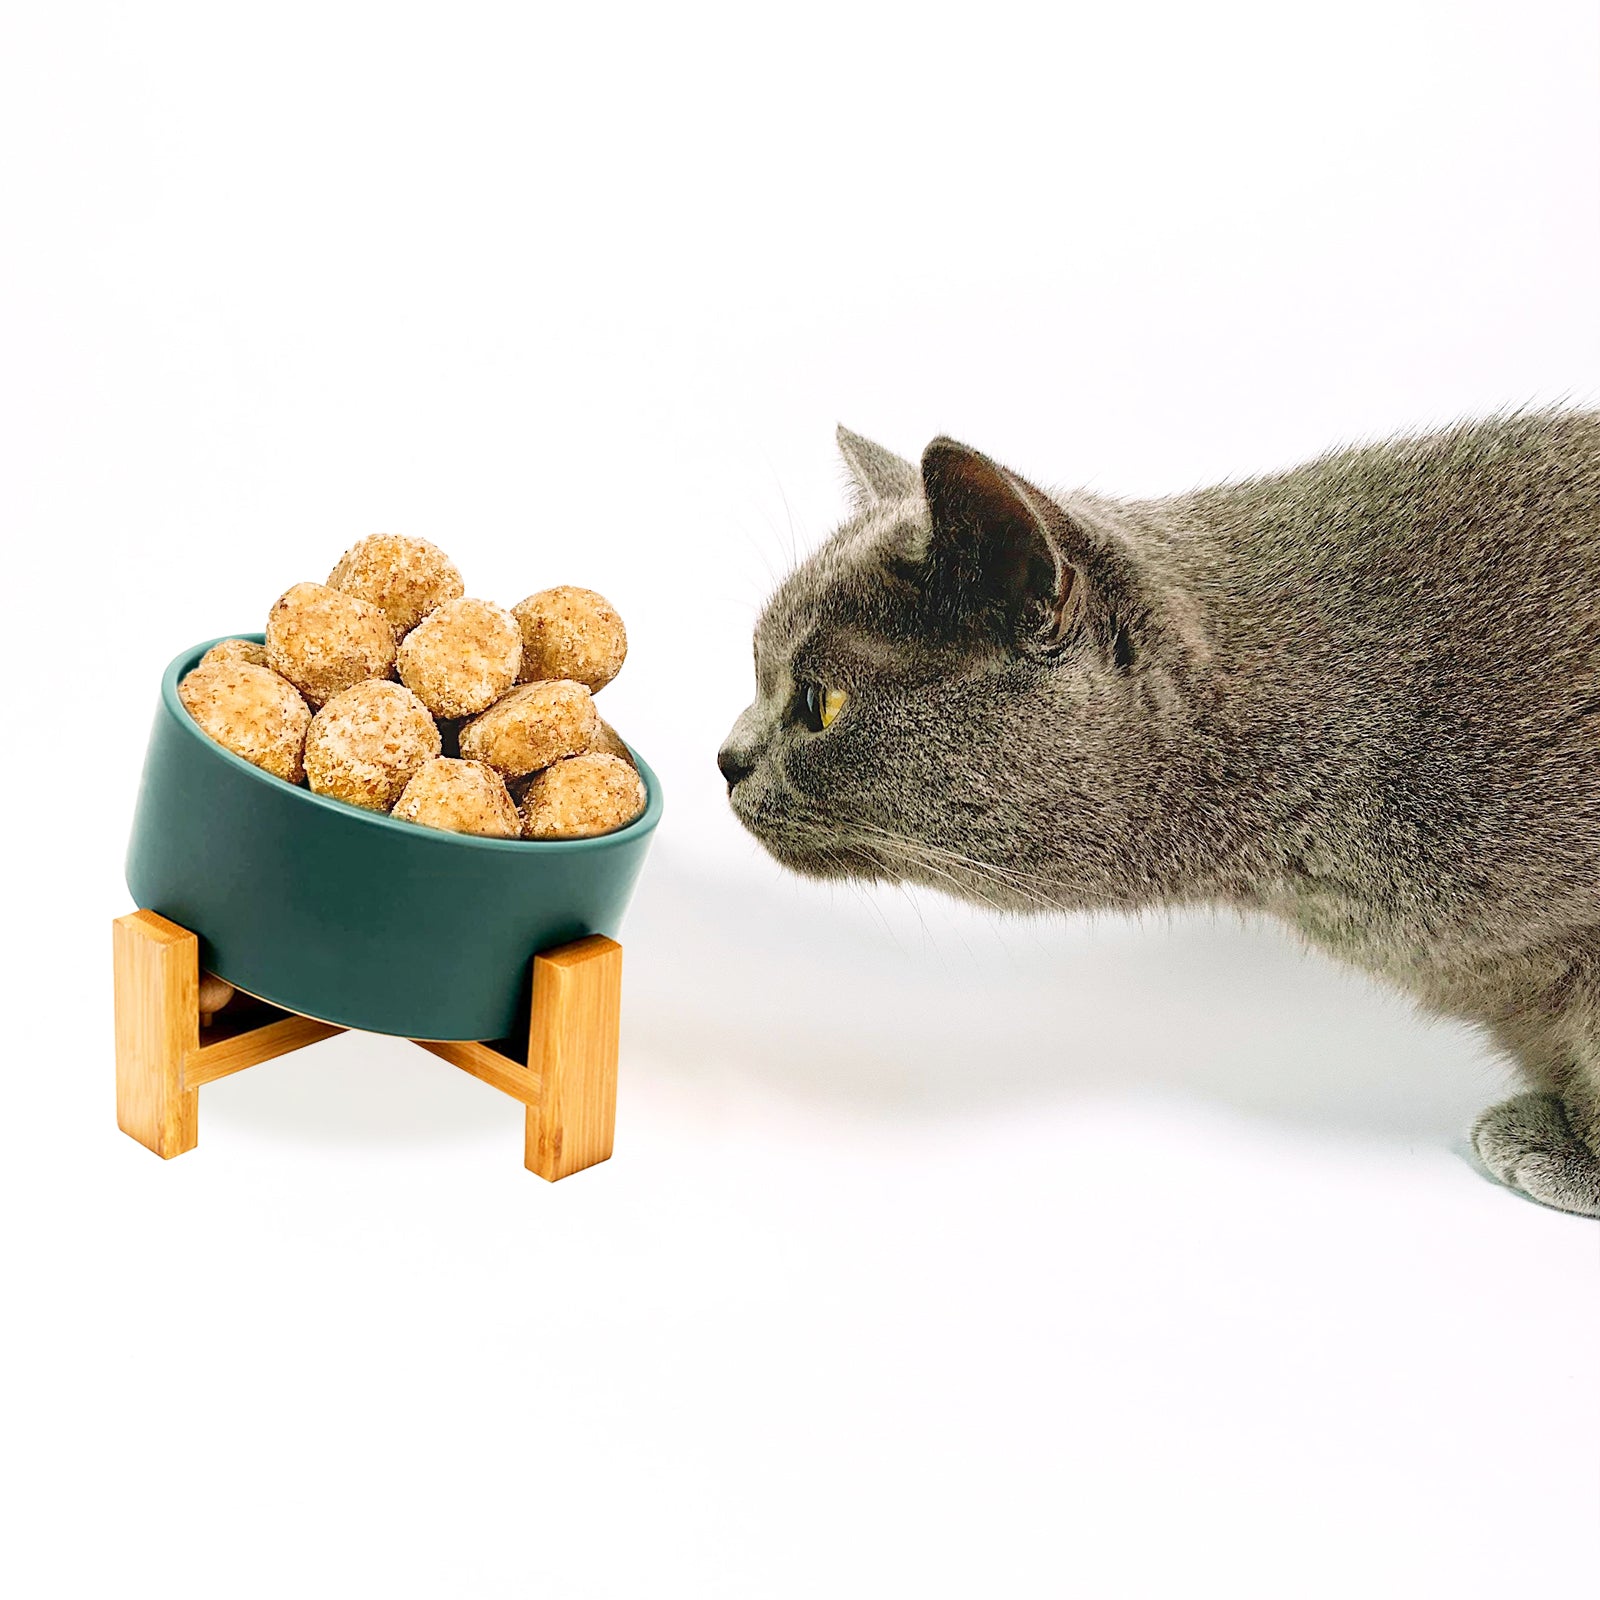 a cat tries to approach the green 15° tilted bowl with food